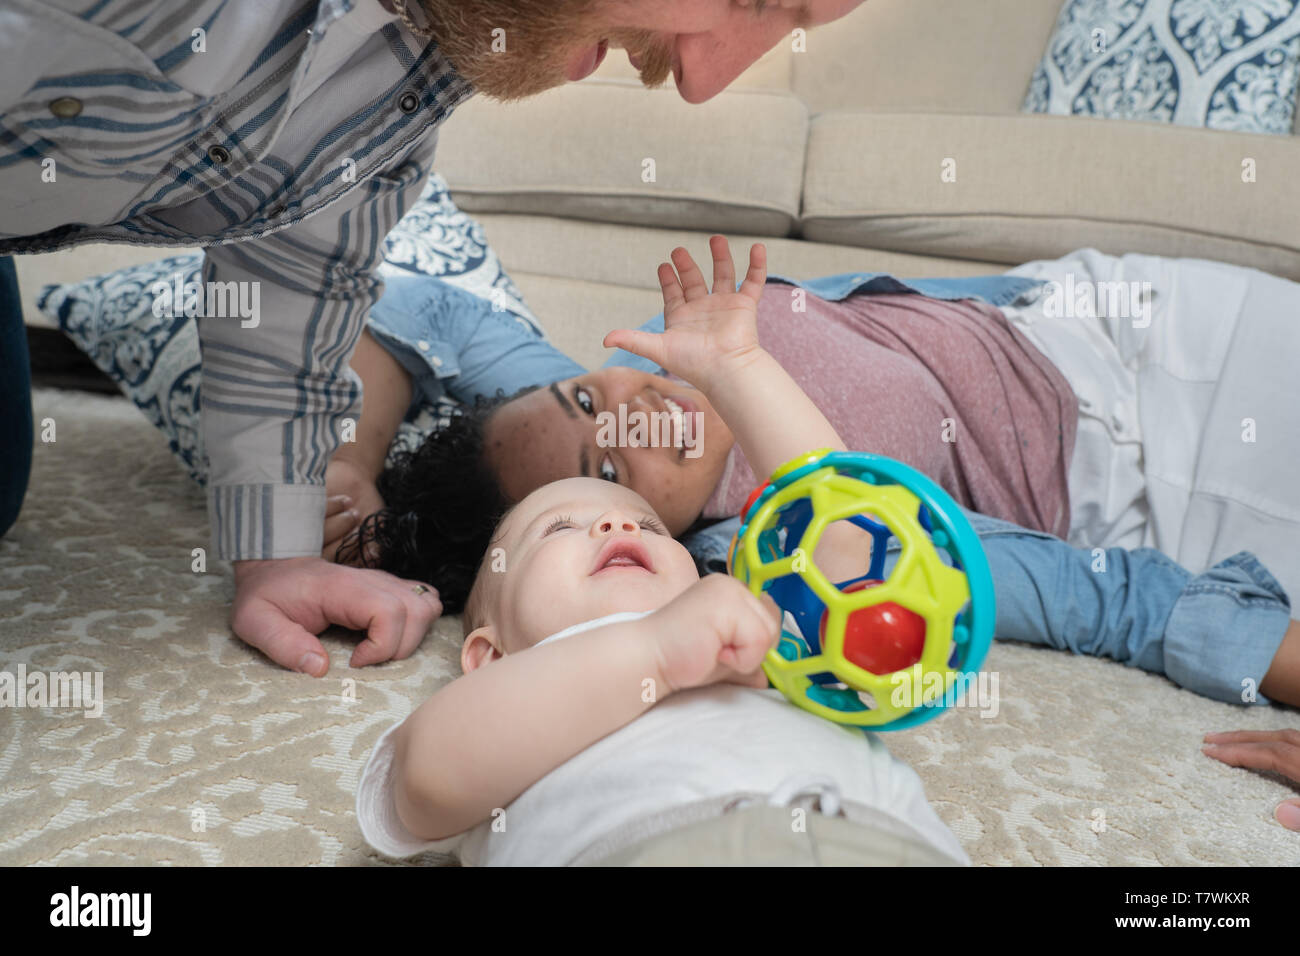 family of  4 in north Philadelphia, 6 month old bby, 15 year old sister. Stock Photo